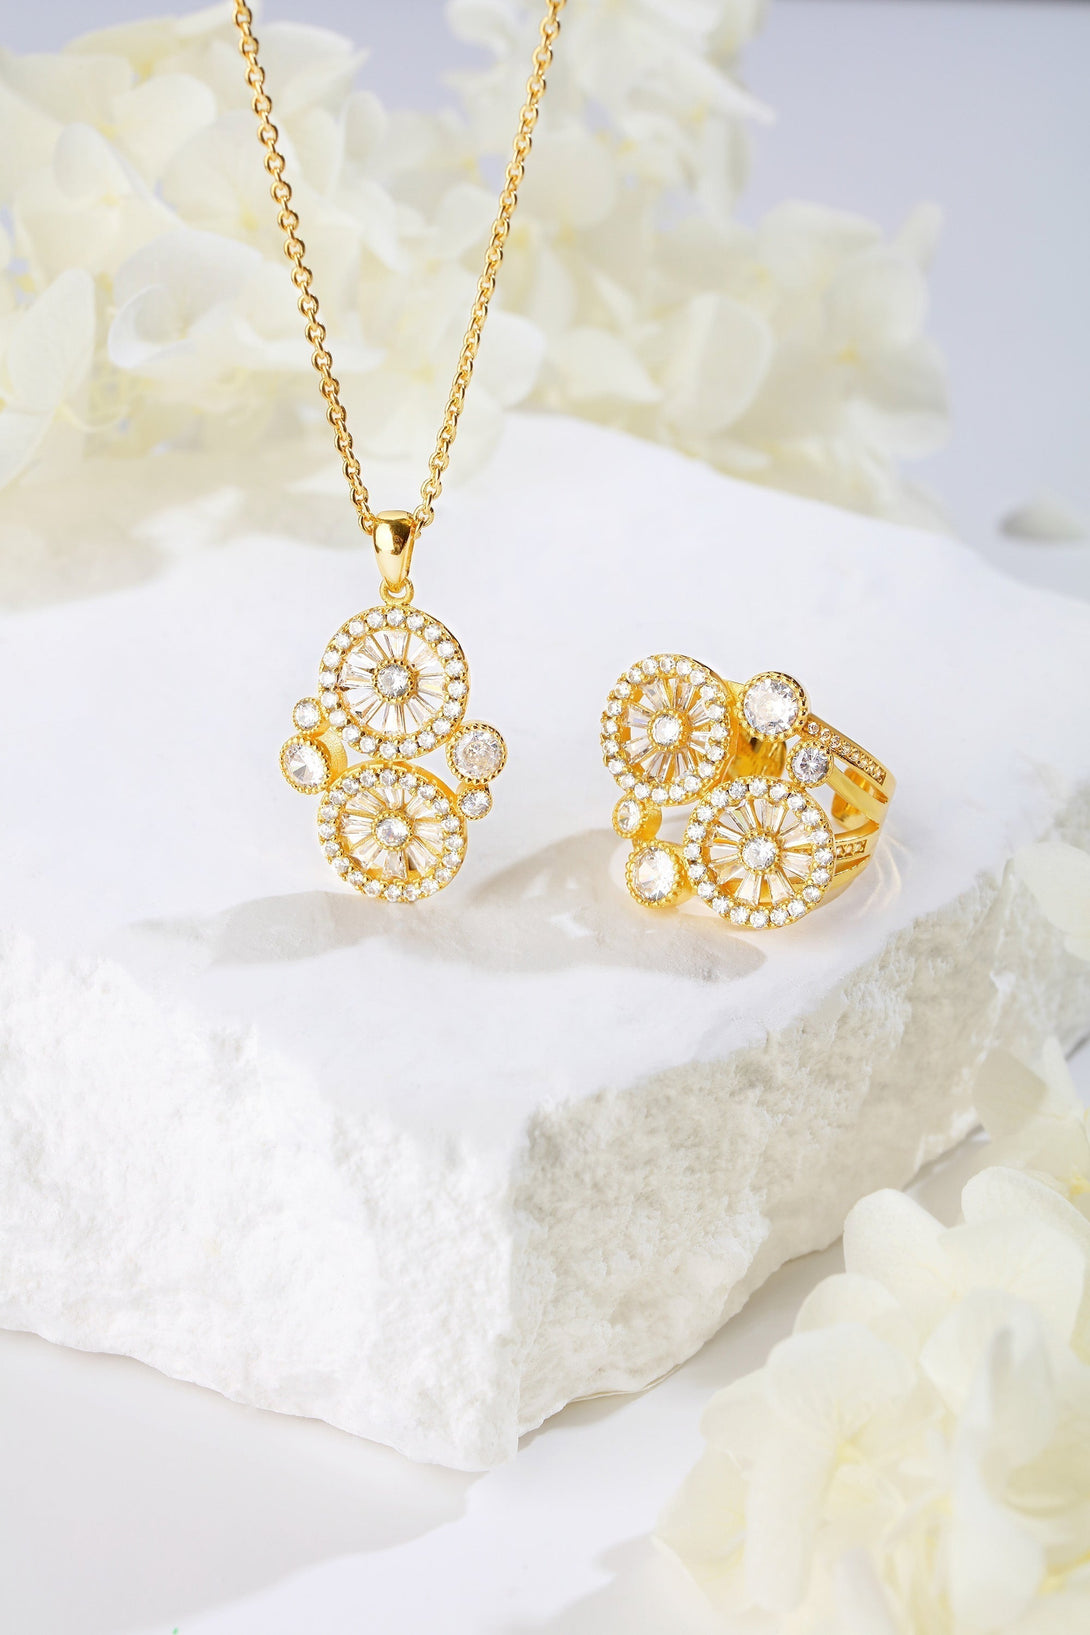 Gold Wheel of Fortune Necklace and Ring Set - Classicharms